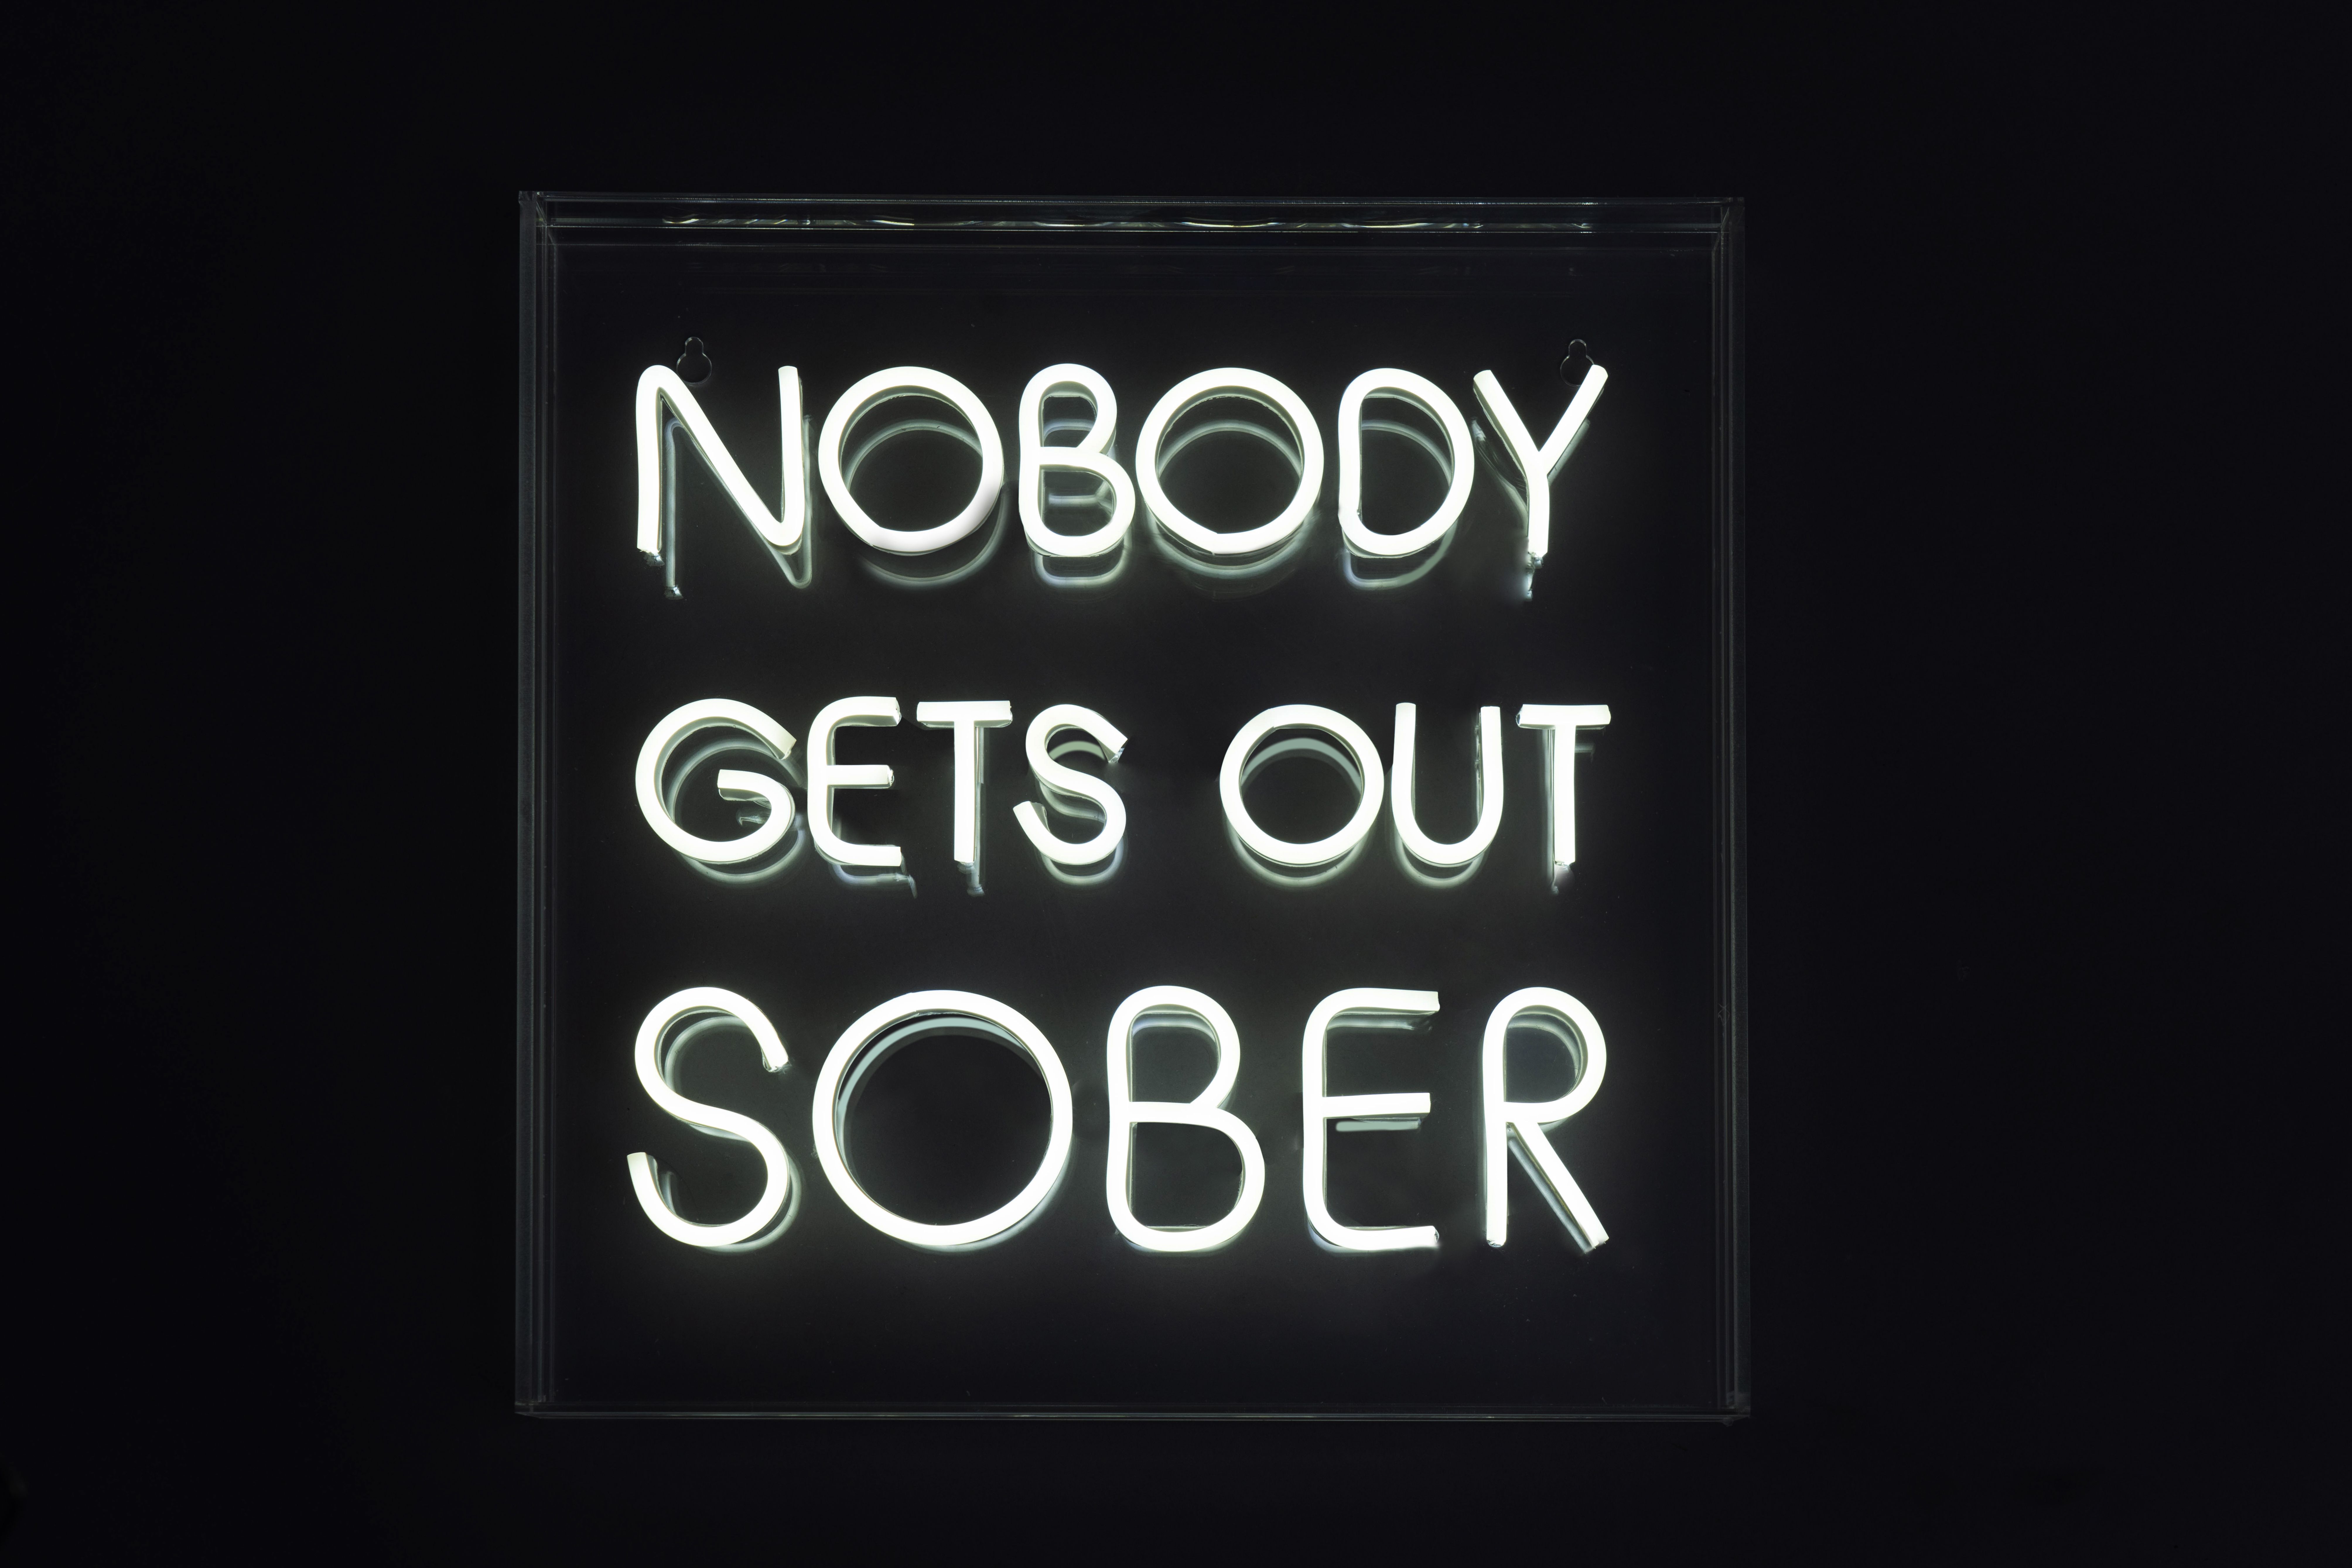 NOBODY GET OUT SOBER - Neon Acrylic Light Box